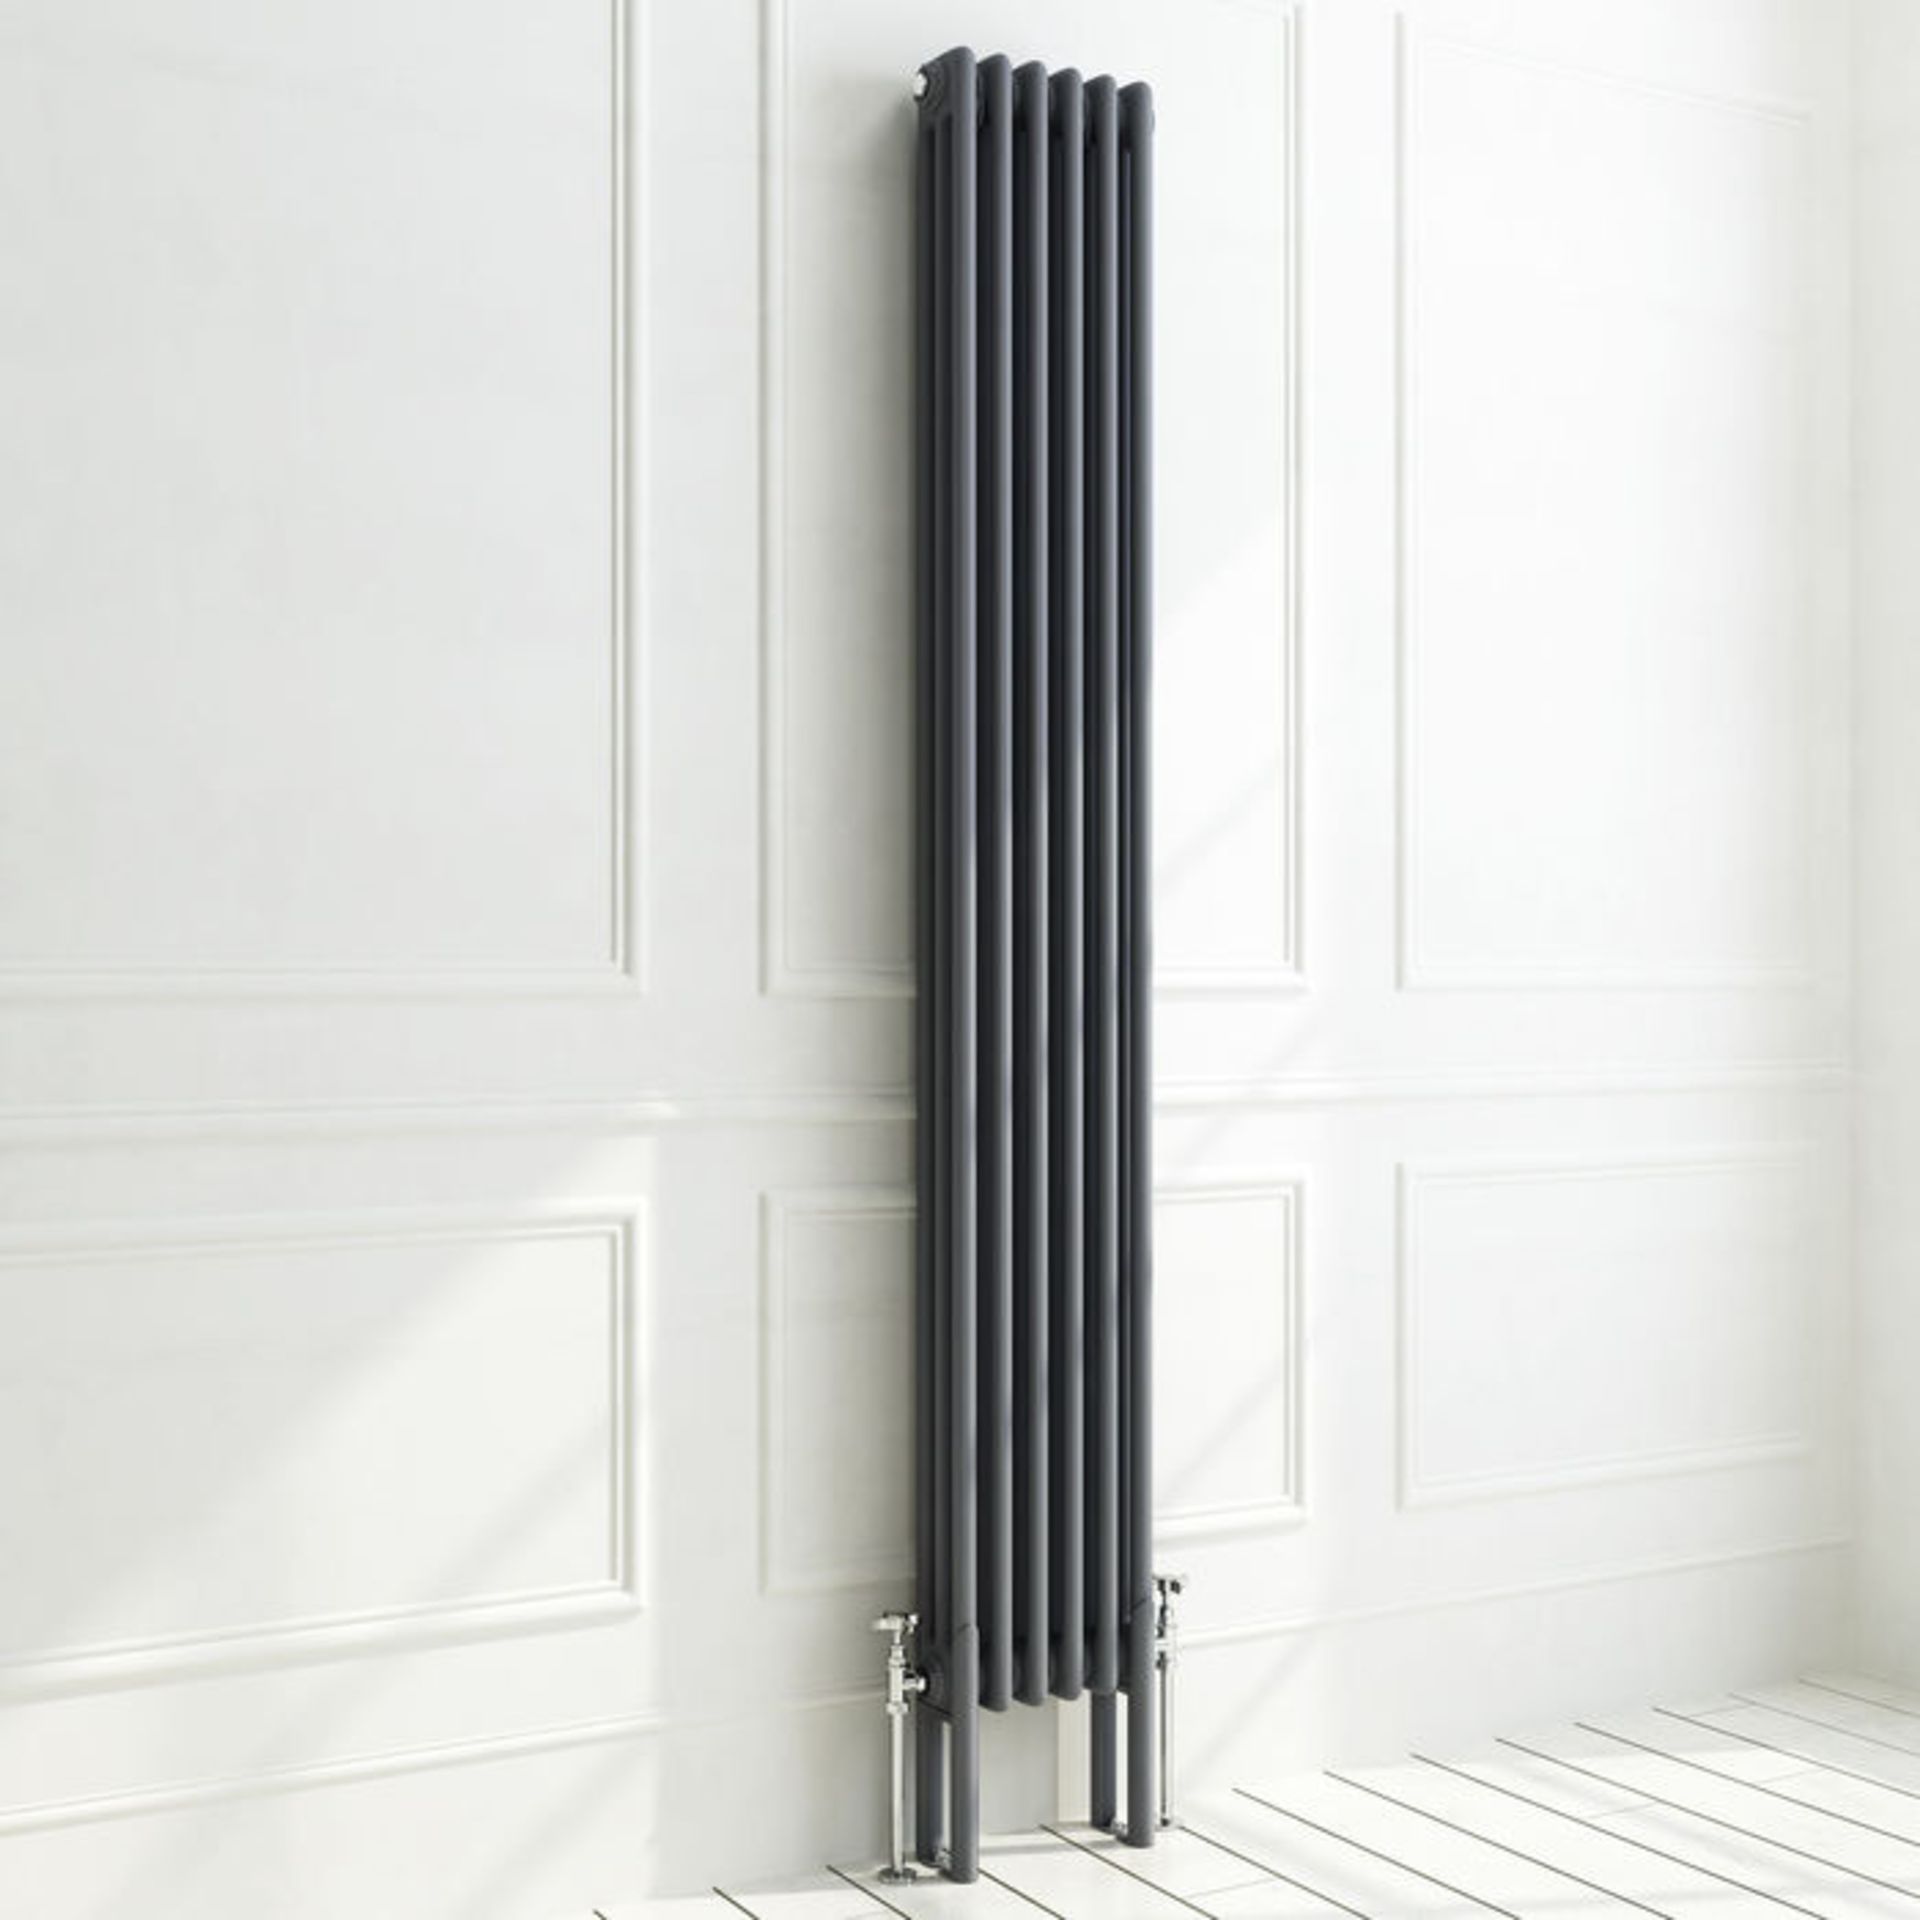 (MW187) 300x102 - Wall Mounting Feet For 3 Bar Radiators - Anthracite. Can be used to floor mount - Image 3 of 3